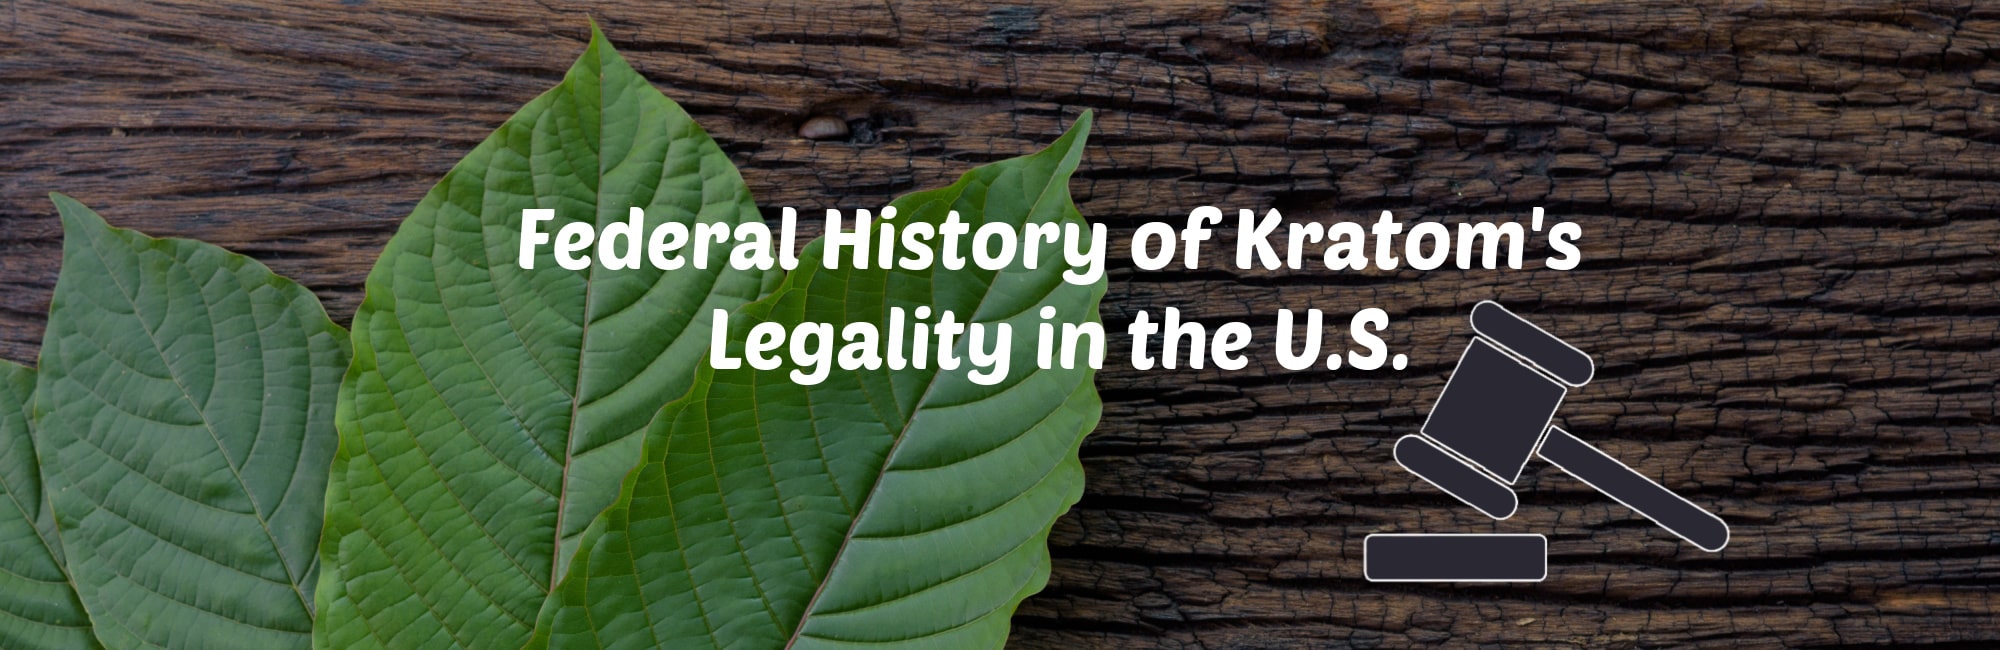 image of federal history of kratoms legality in the u.s